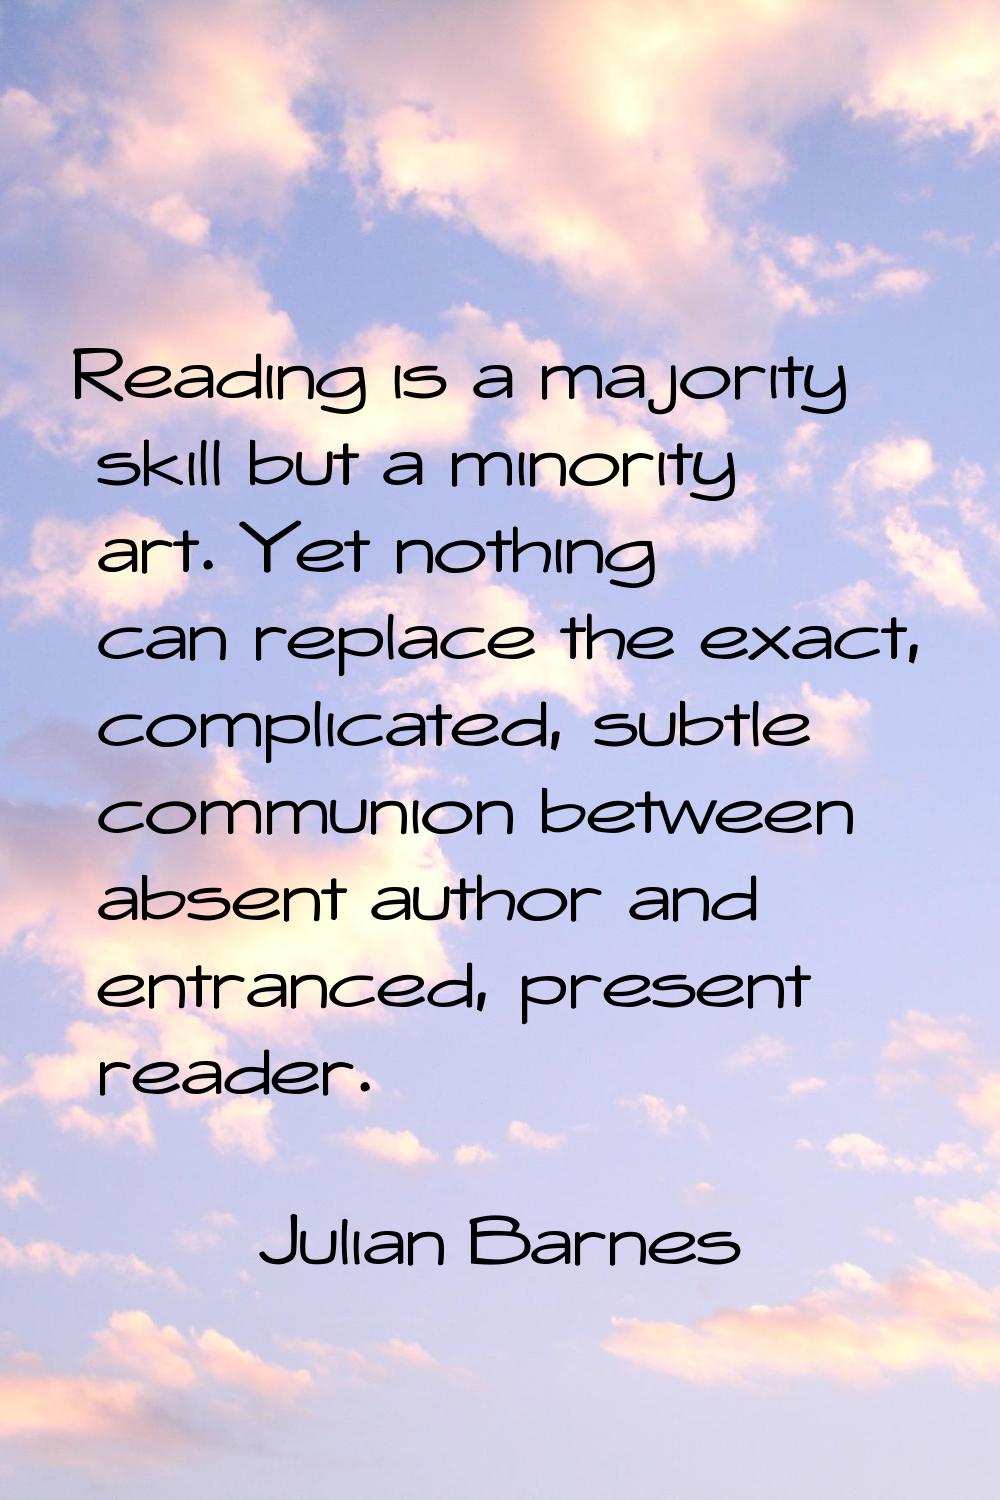 Reading is a majority skill but a minority art. Yet nothing can replace the exact, complicated, sub